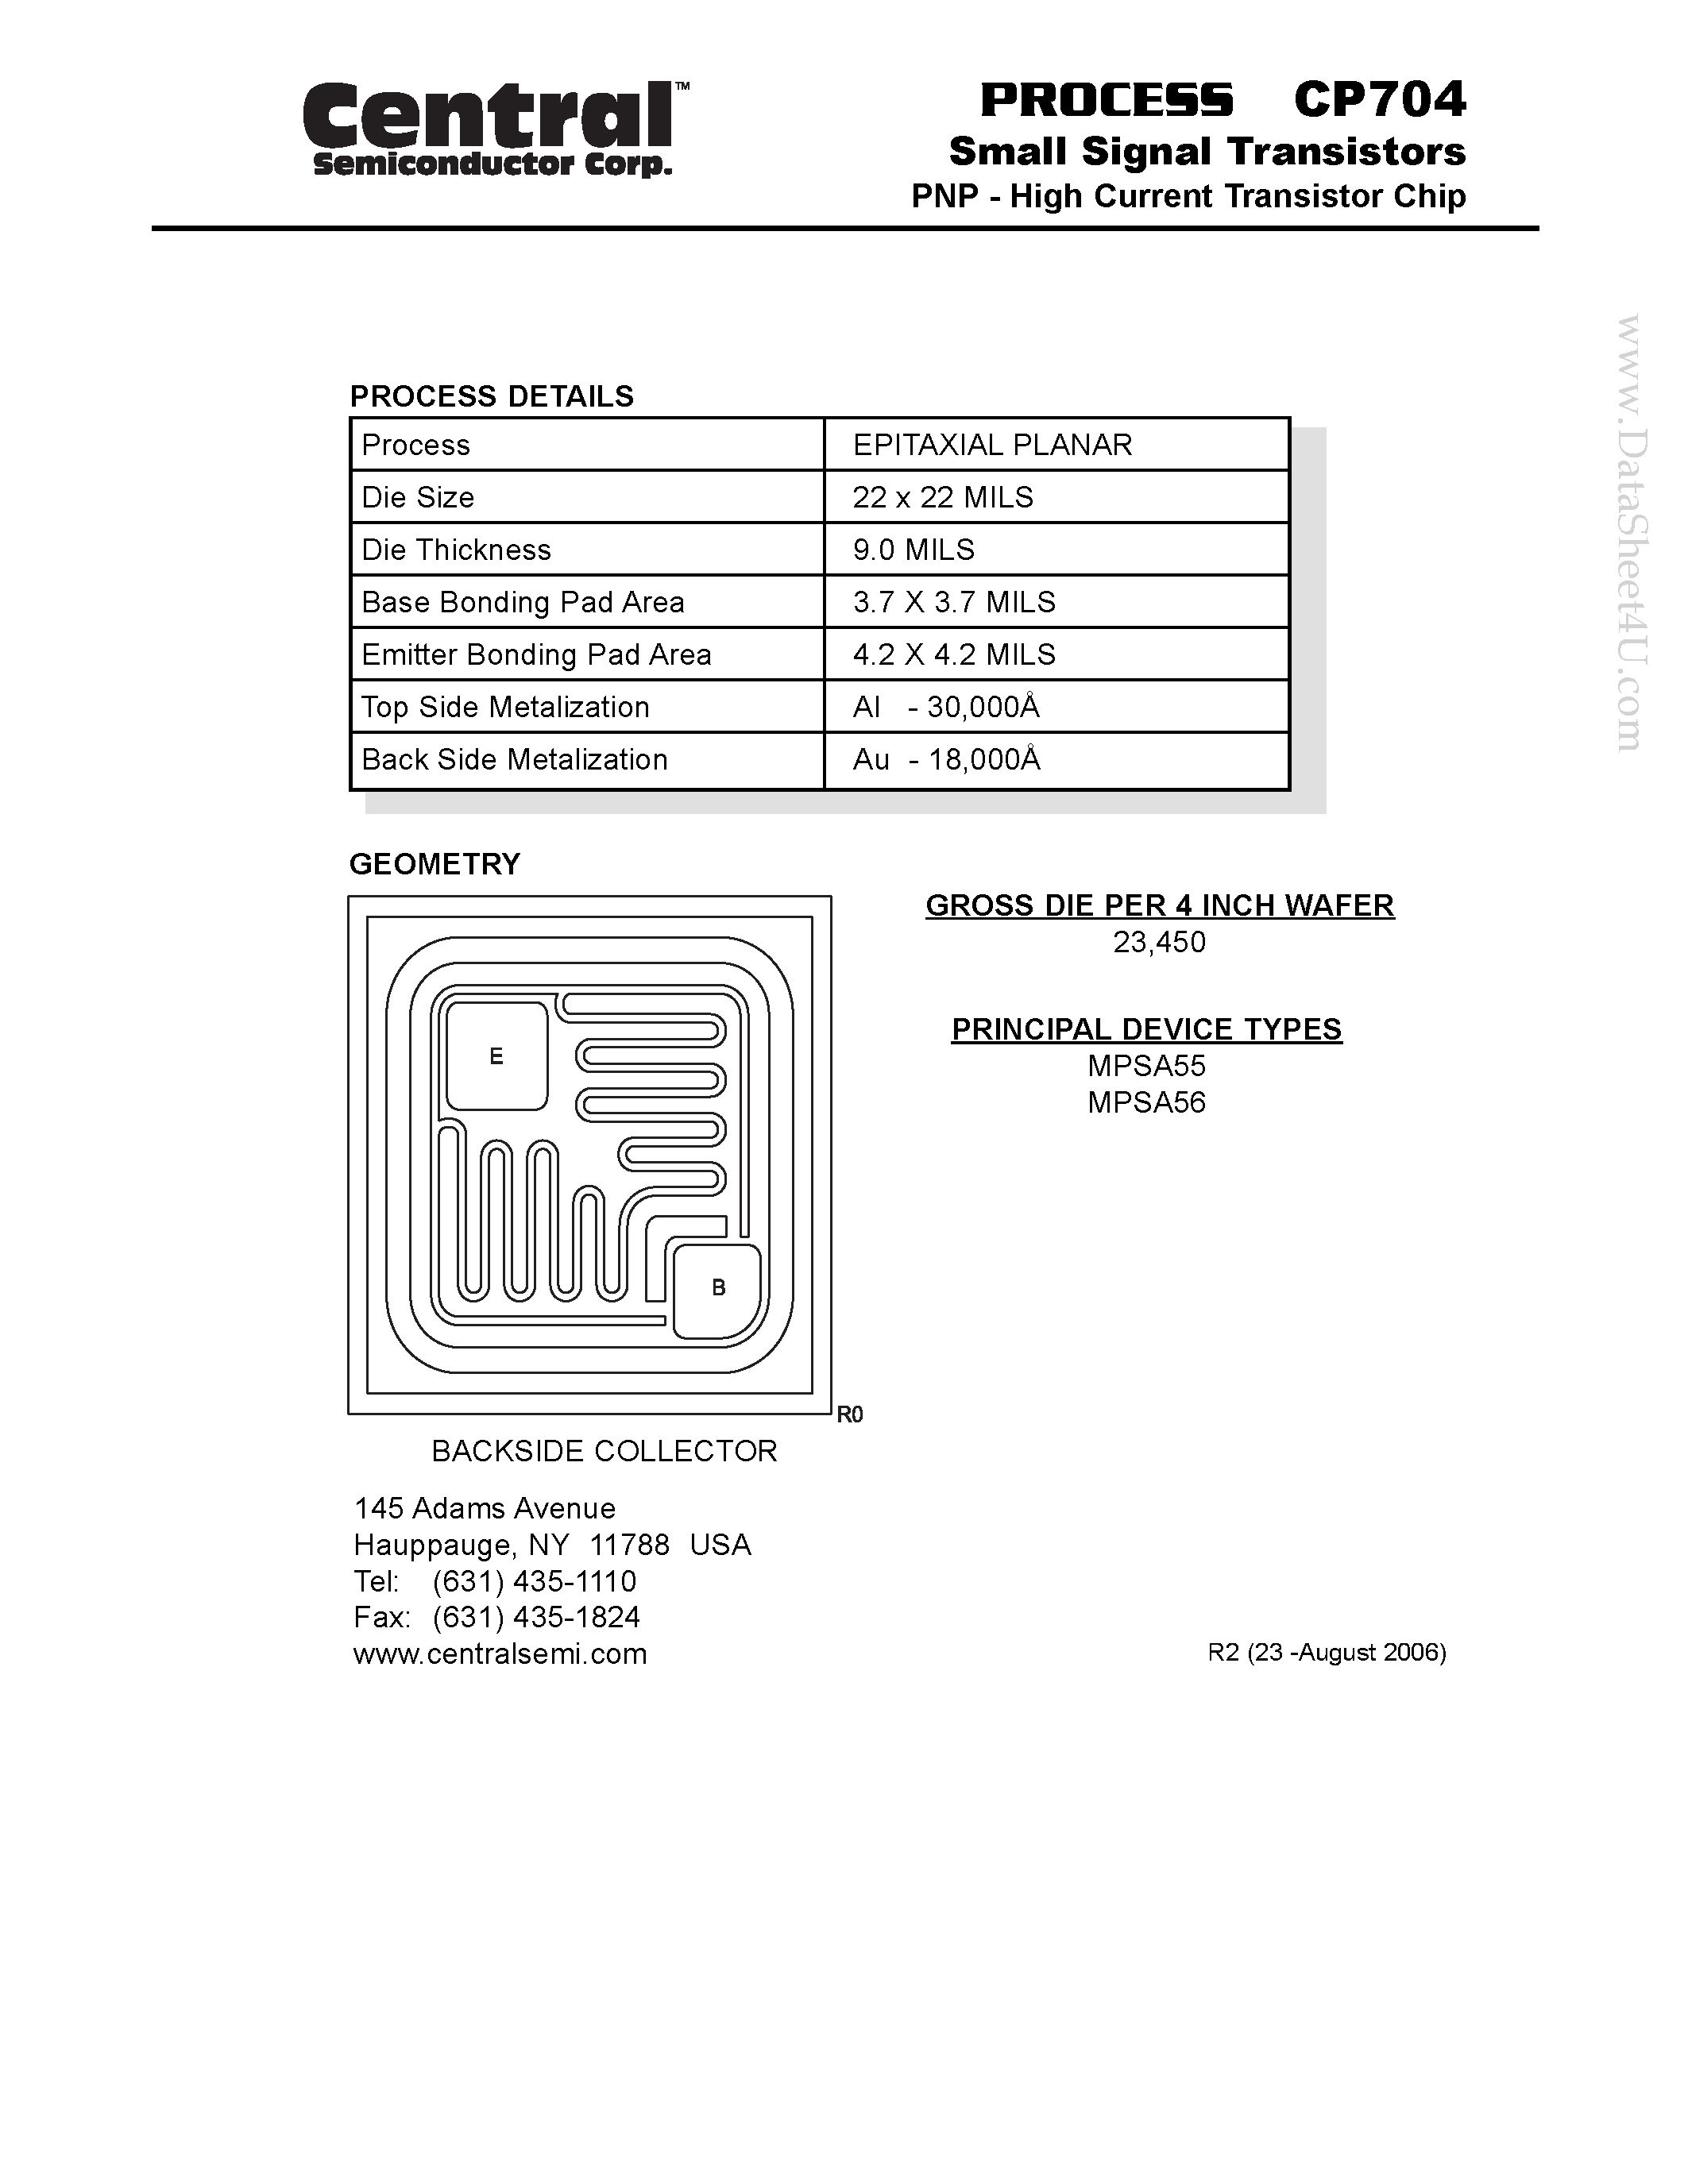 Datasheet CP704 - Small Signal Transistors PNP - High Current Transistor Chip page 1